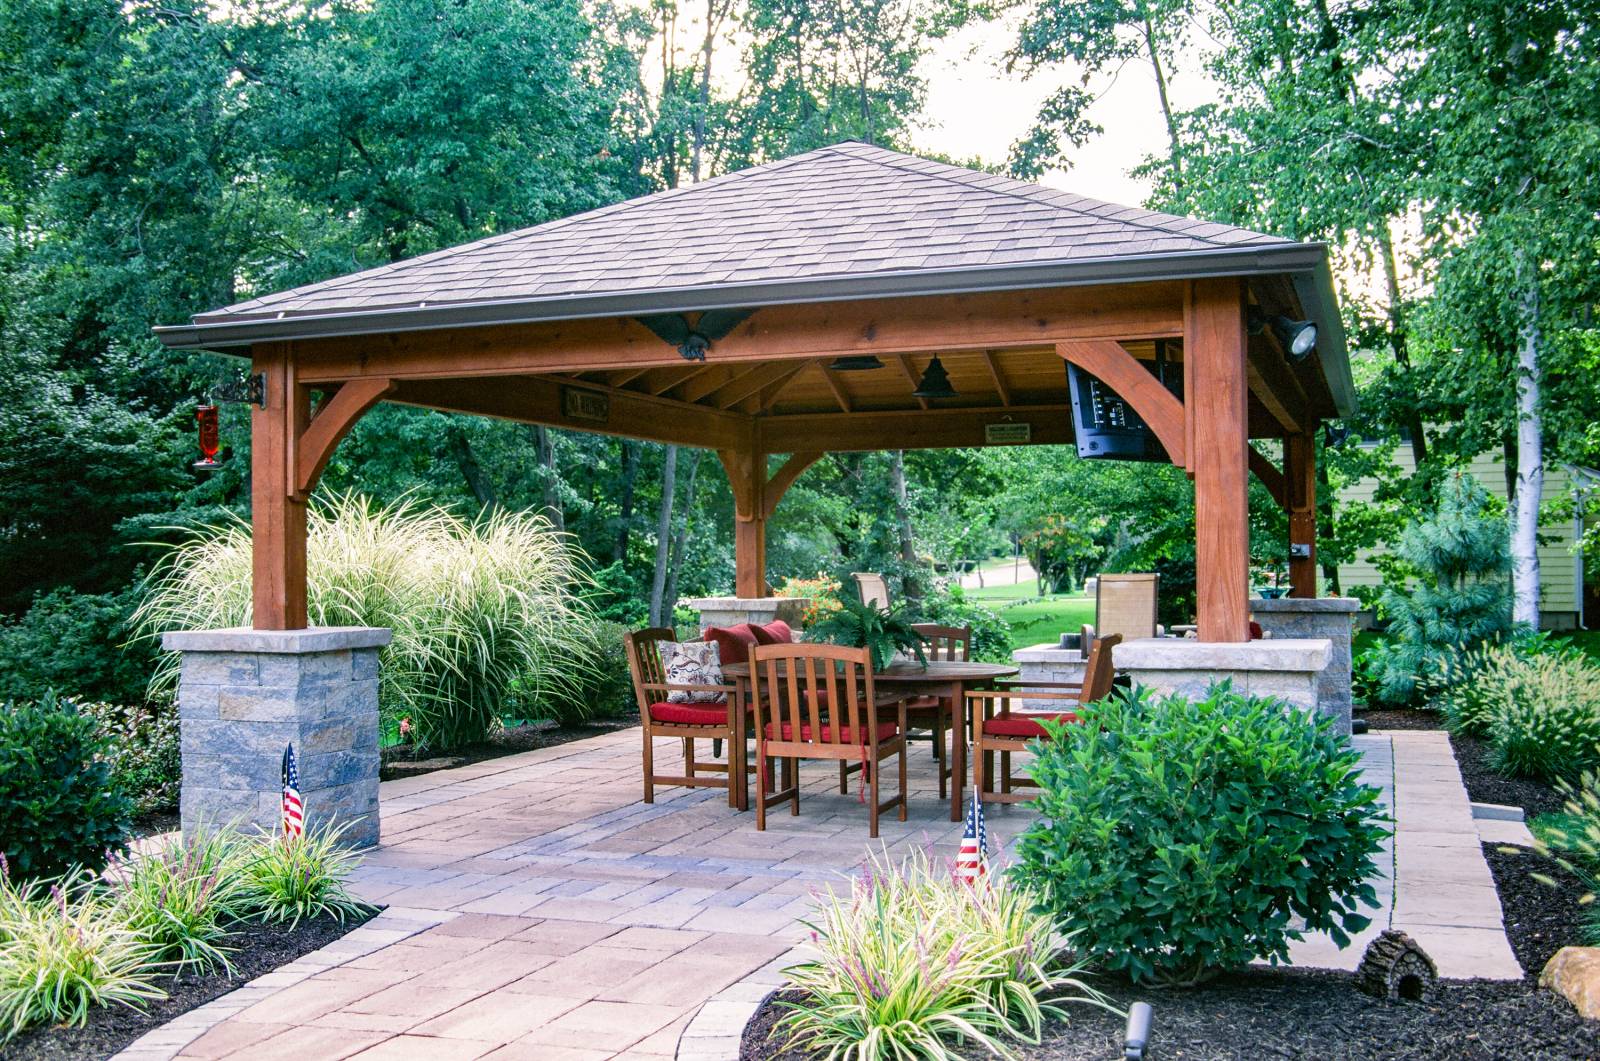 The center of your outdoor living space